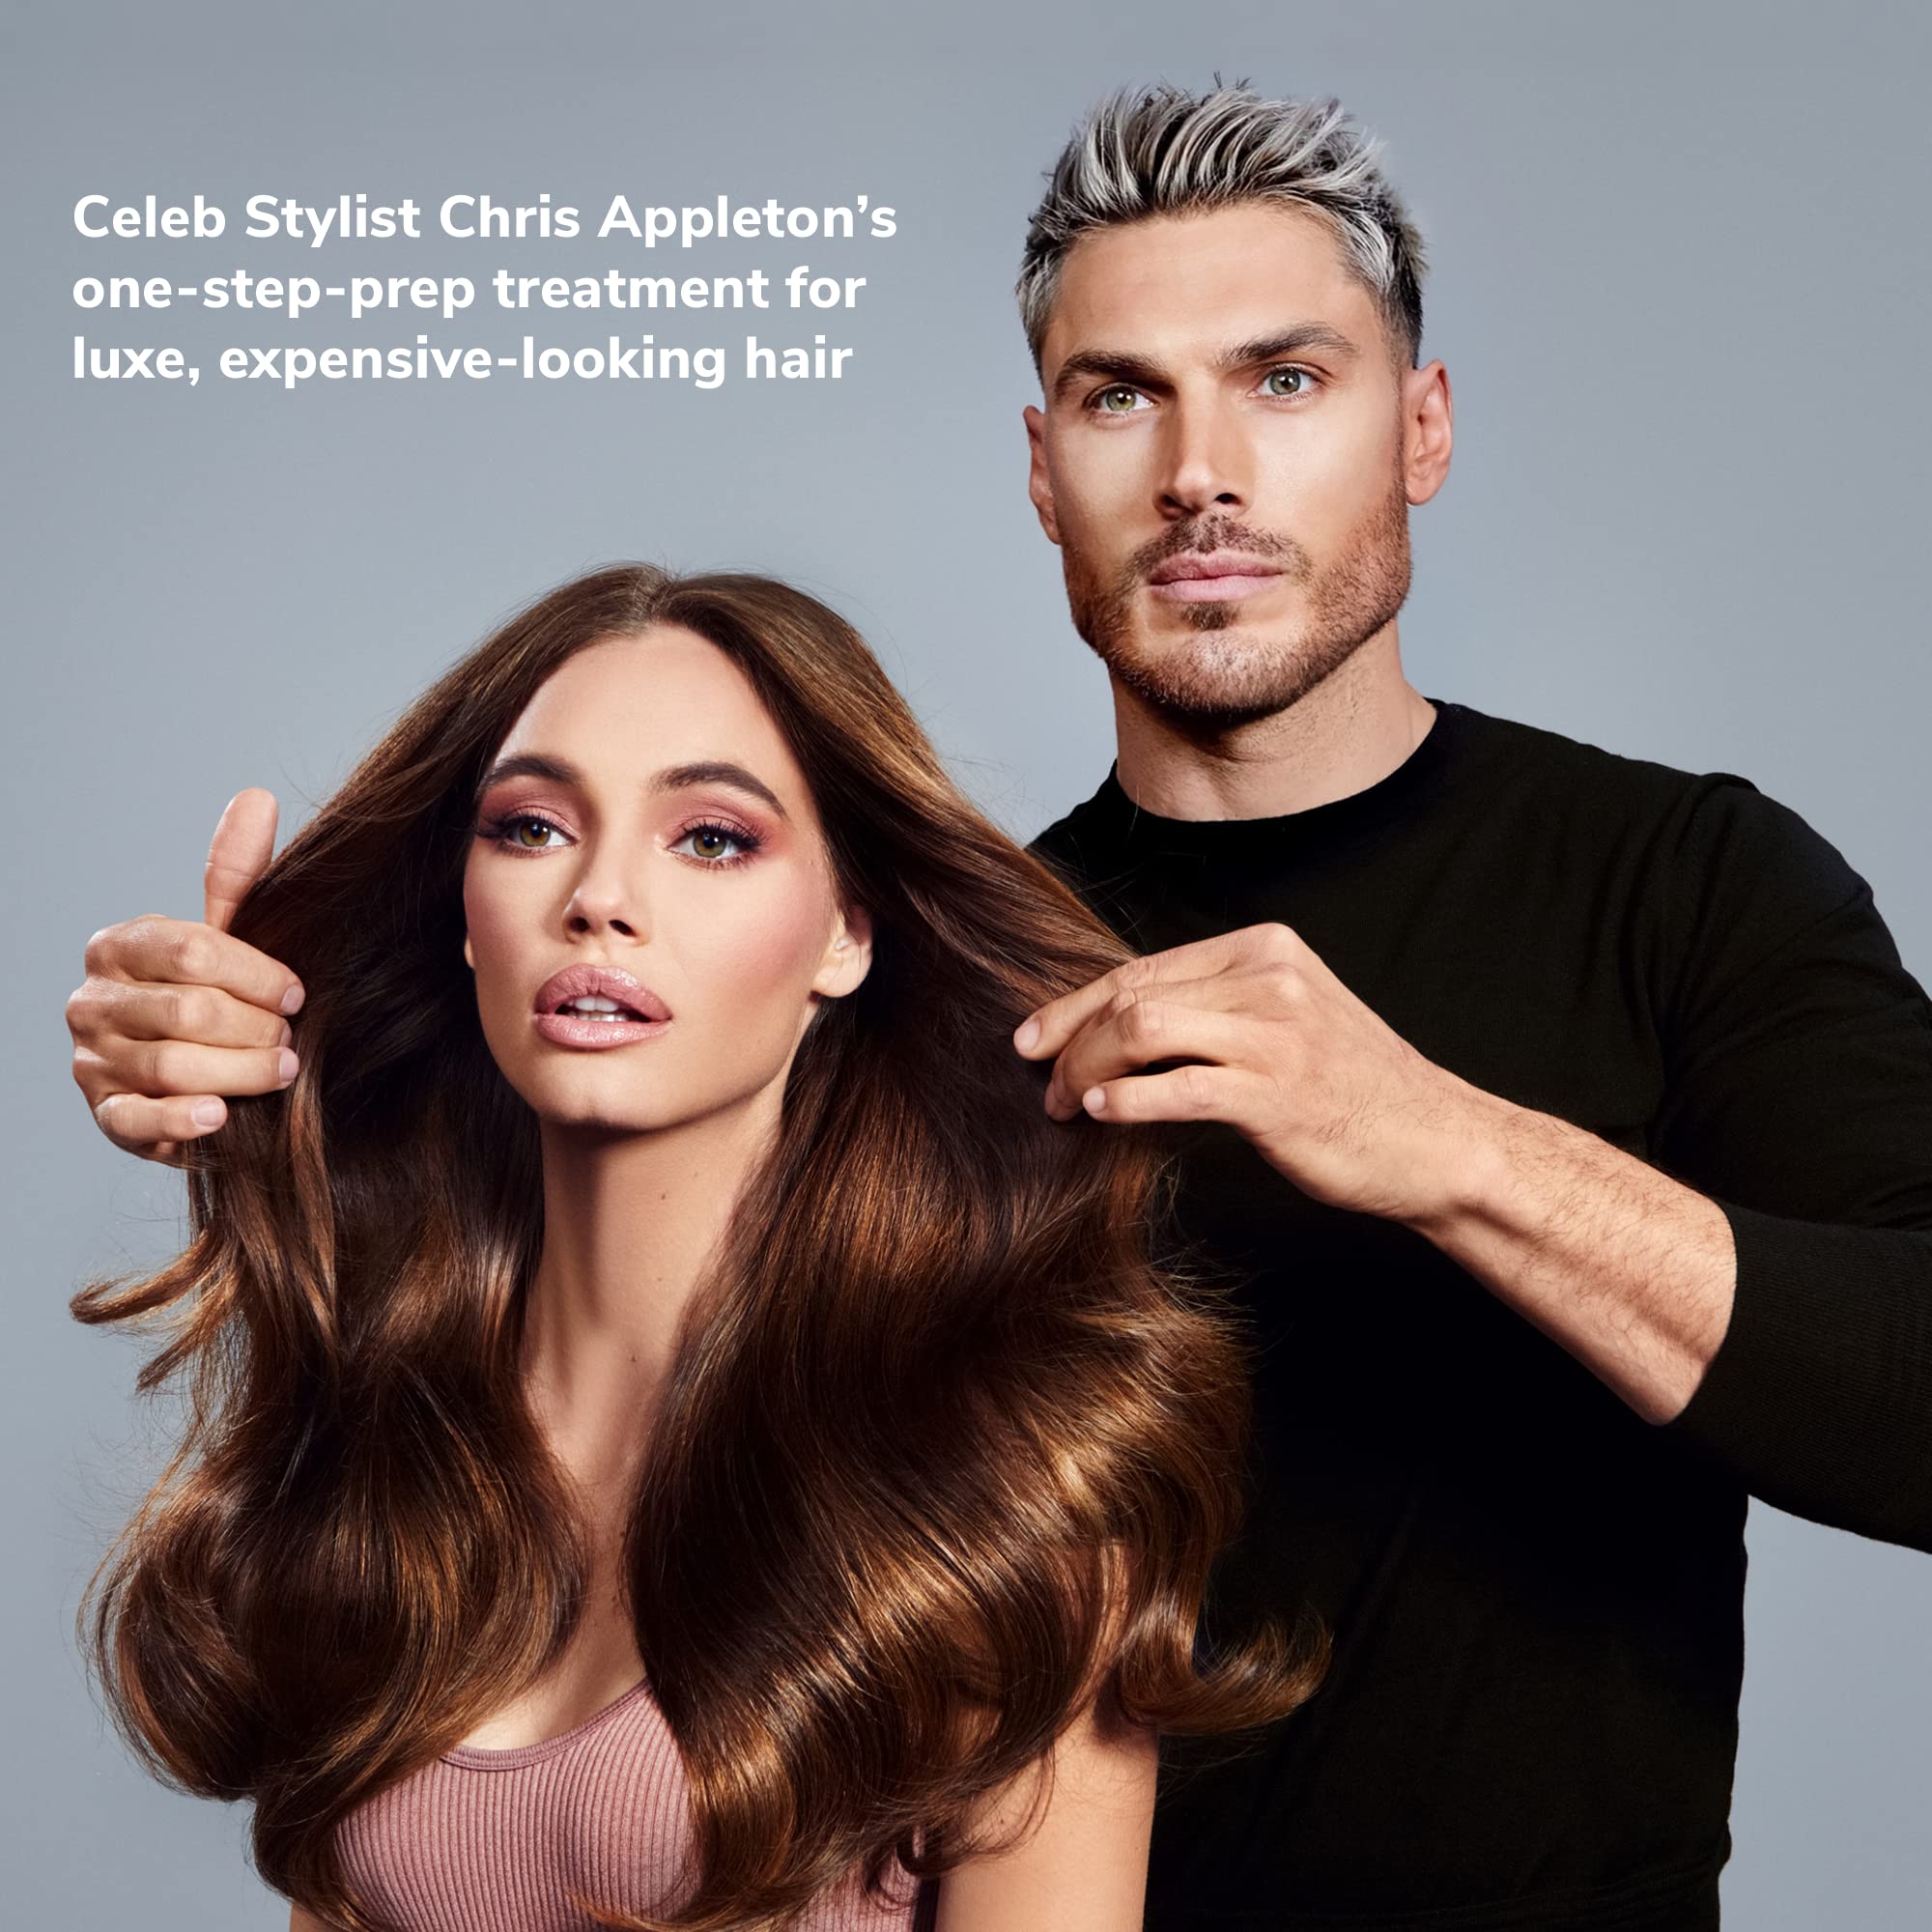 Color Wow Money Masque – Deep hydrating conditioning treatment created with celebrity stylist Chris Appleton; Hydrates,repairs,silkens all hair types,color-treated,dry,damaged,curly,fine; Vegan